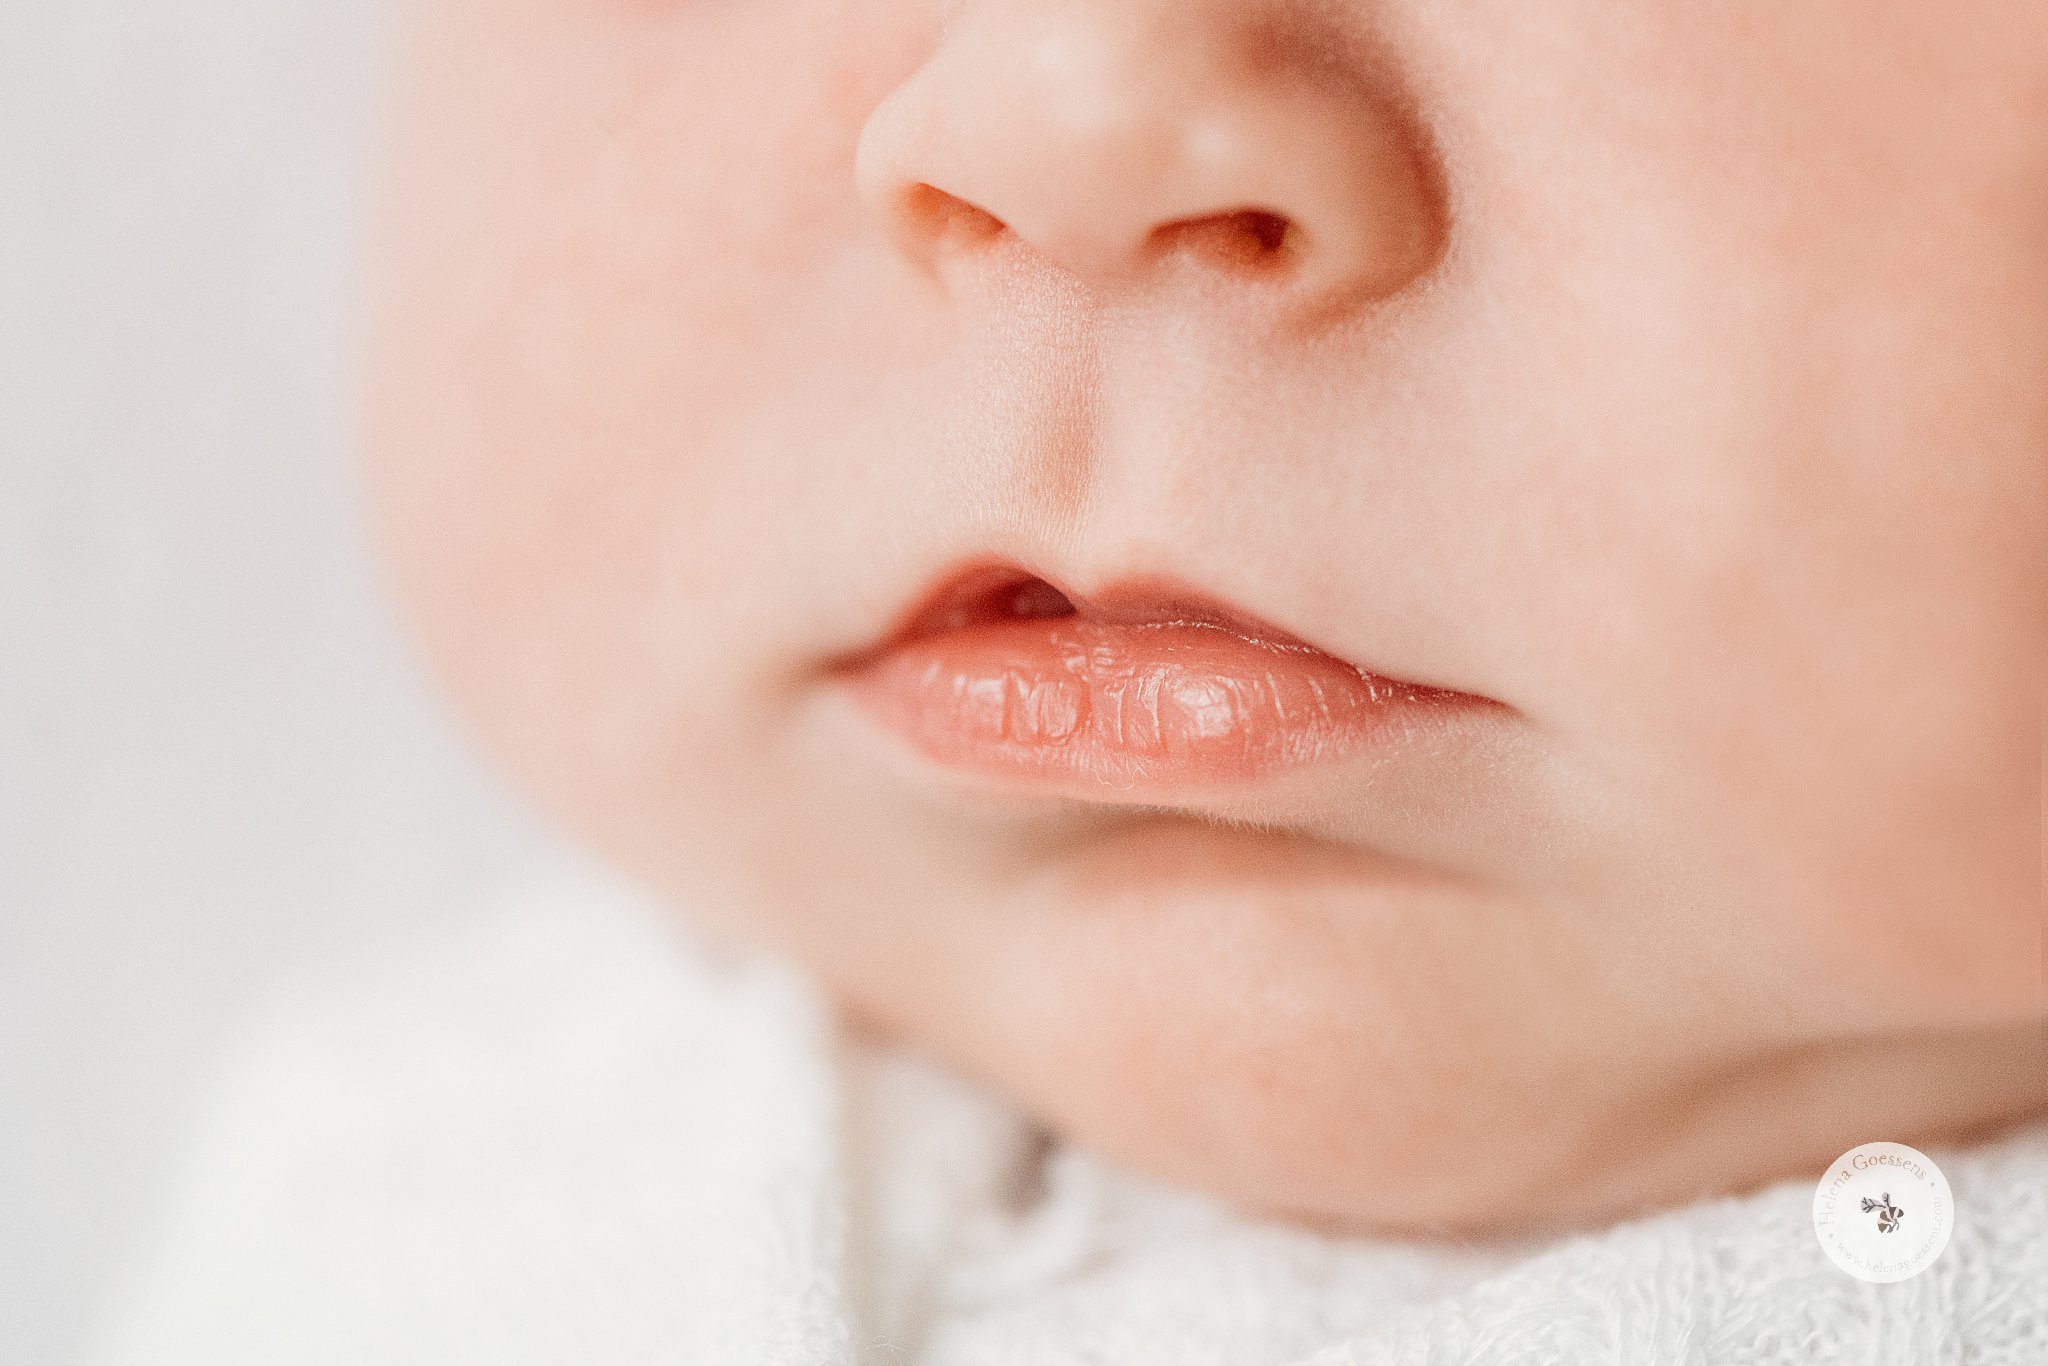 detail photo of baby's lips during lifestyle session 